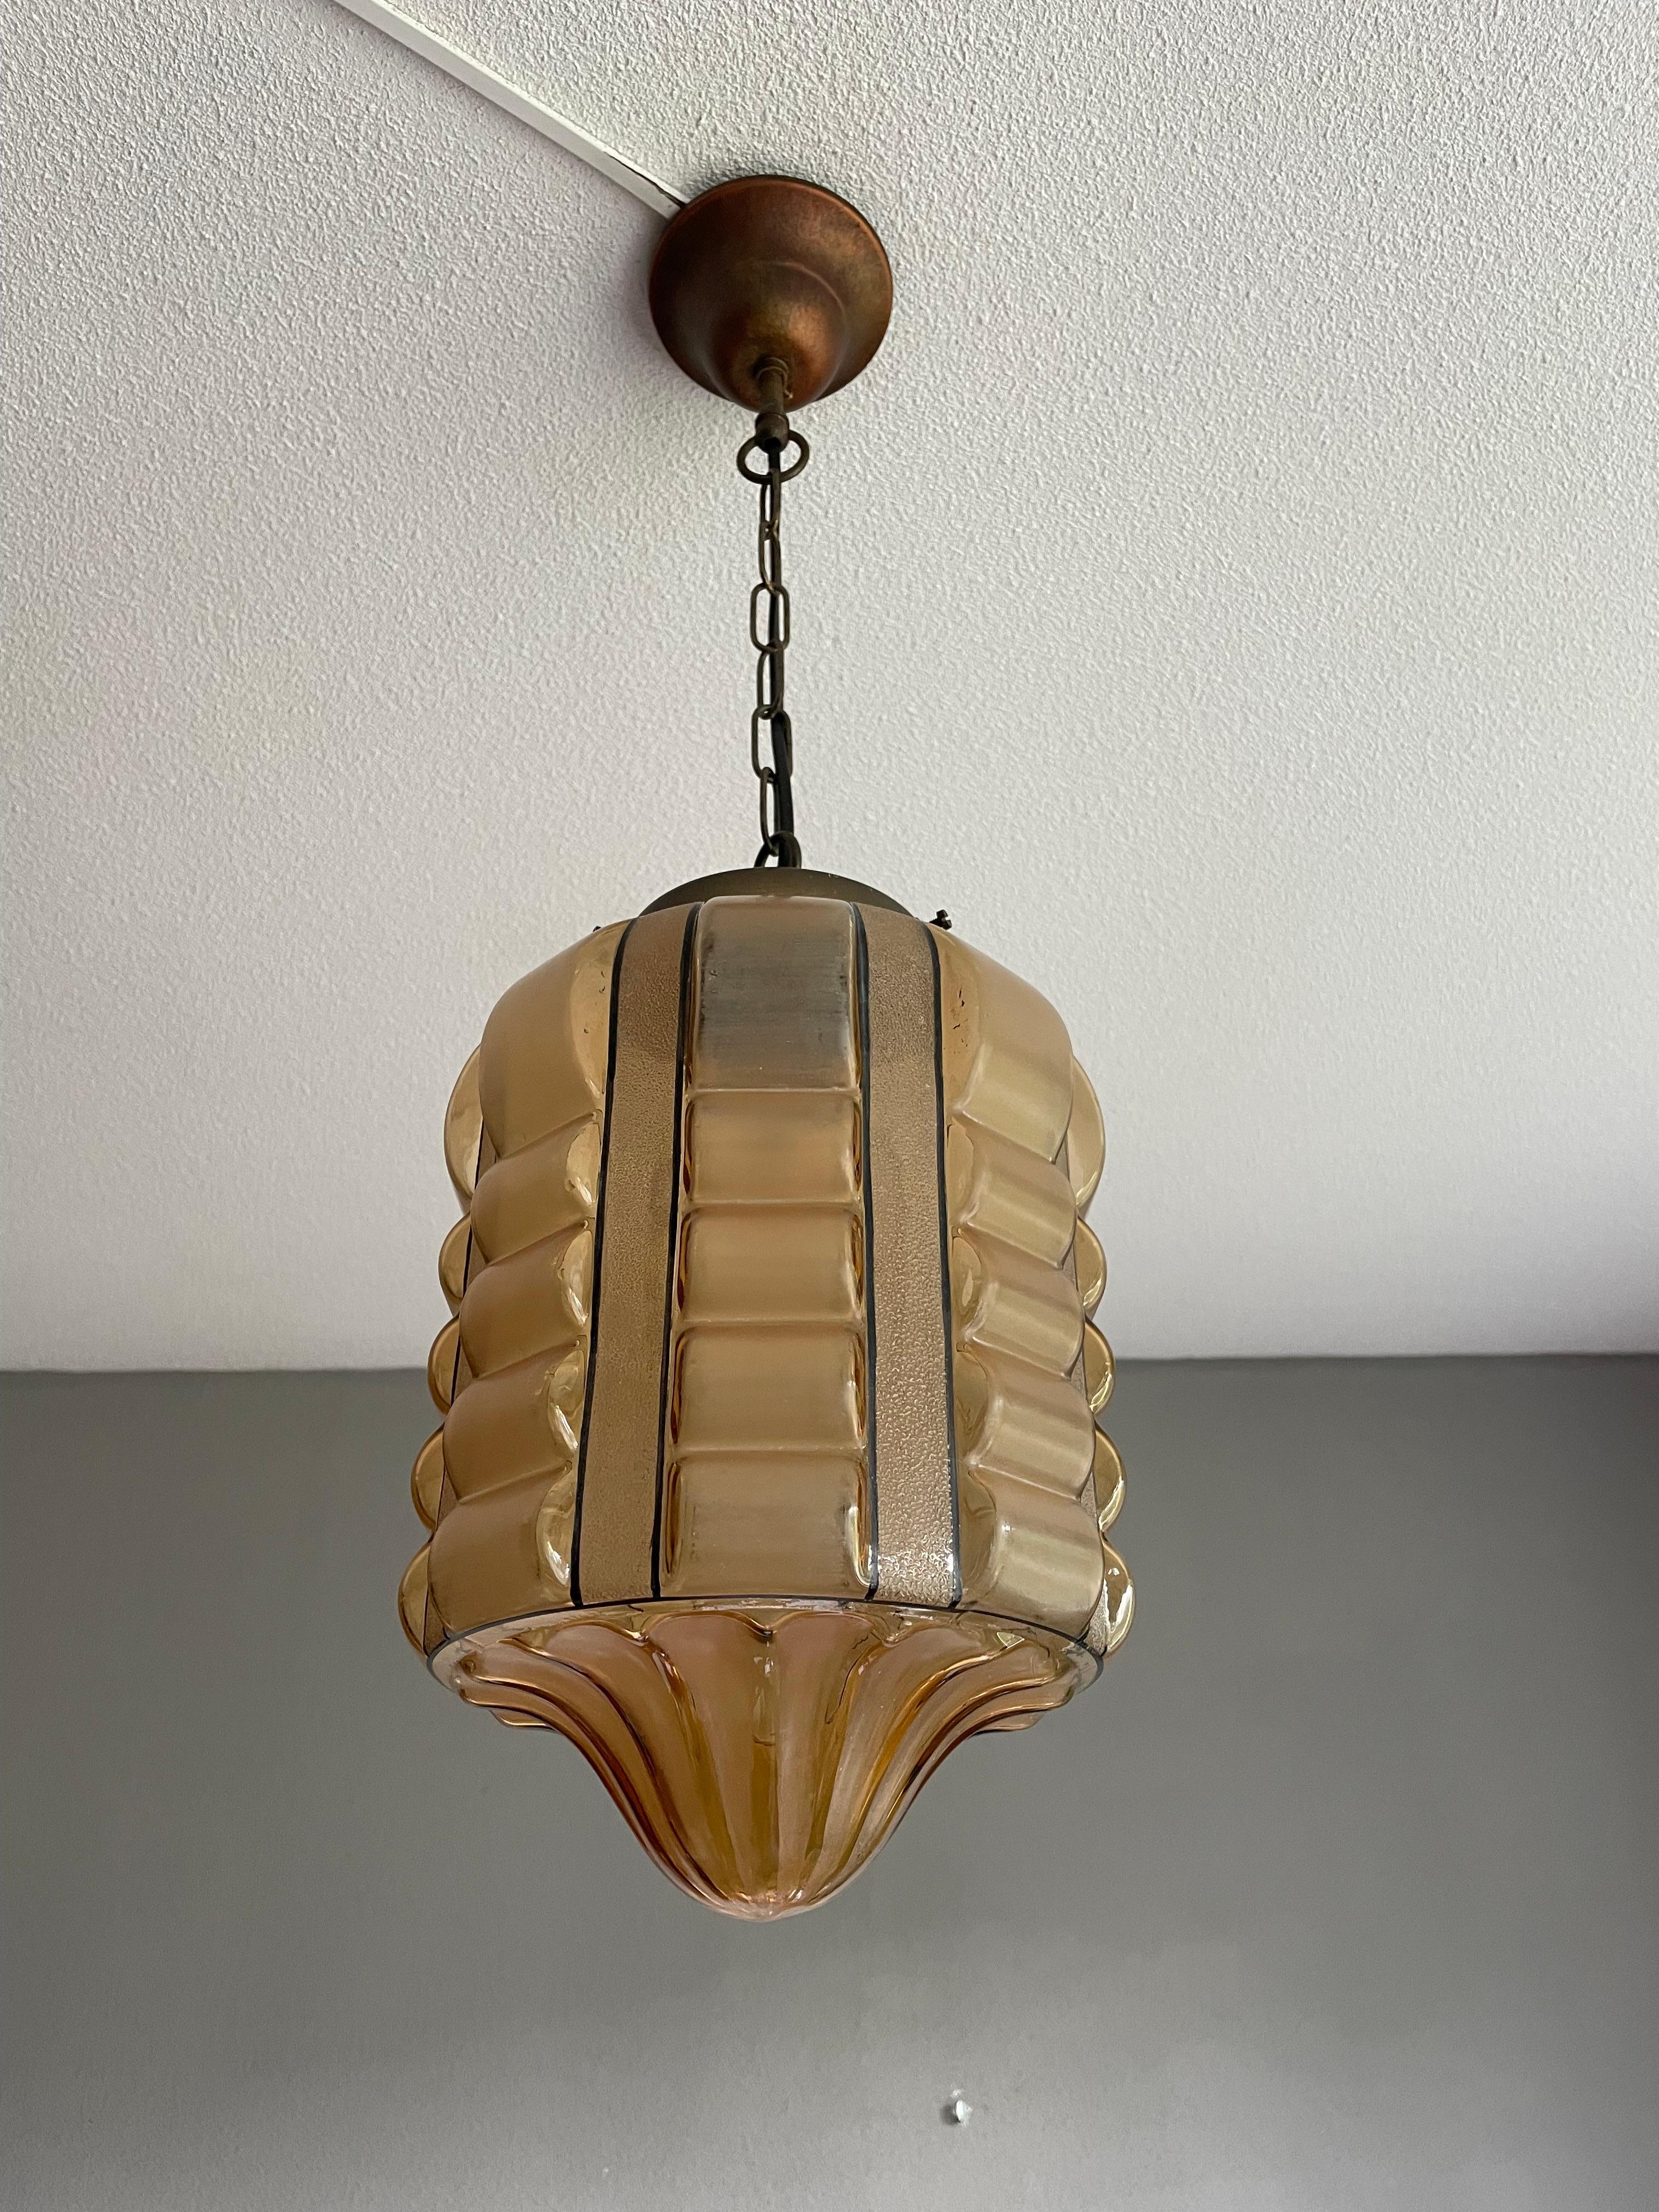 Rare Rounded Geometrical Design Art Deco Pendant Light with Brass Chain & Canopy 9